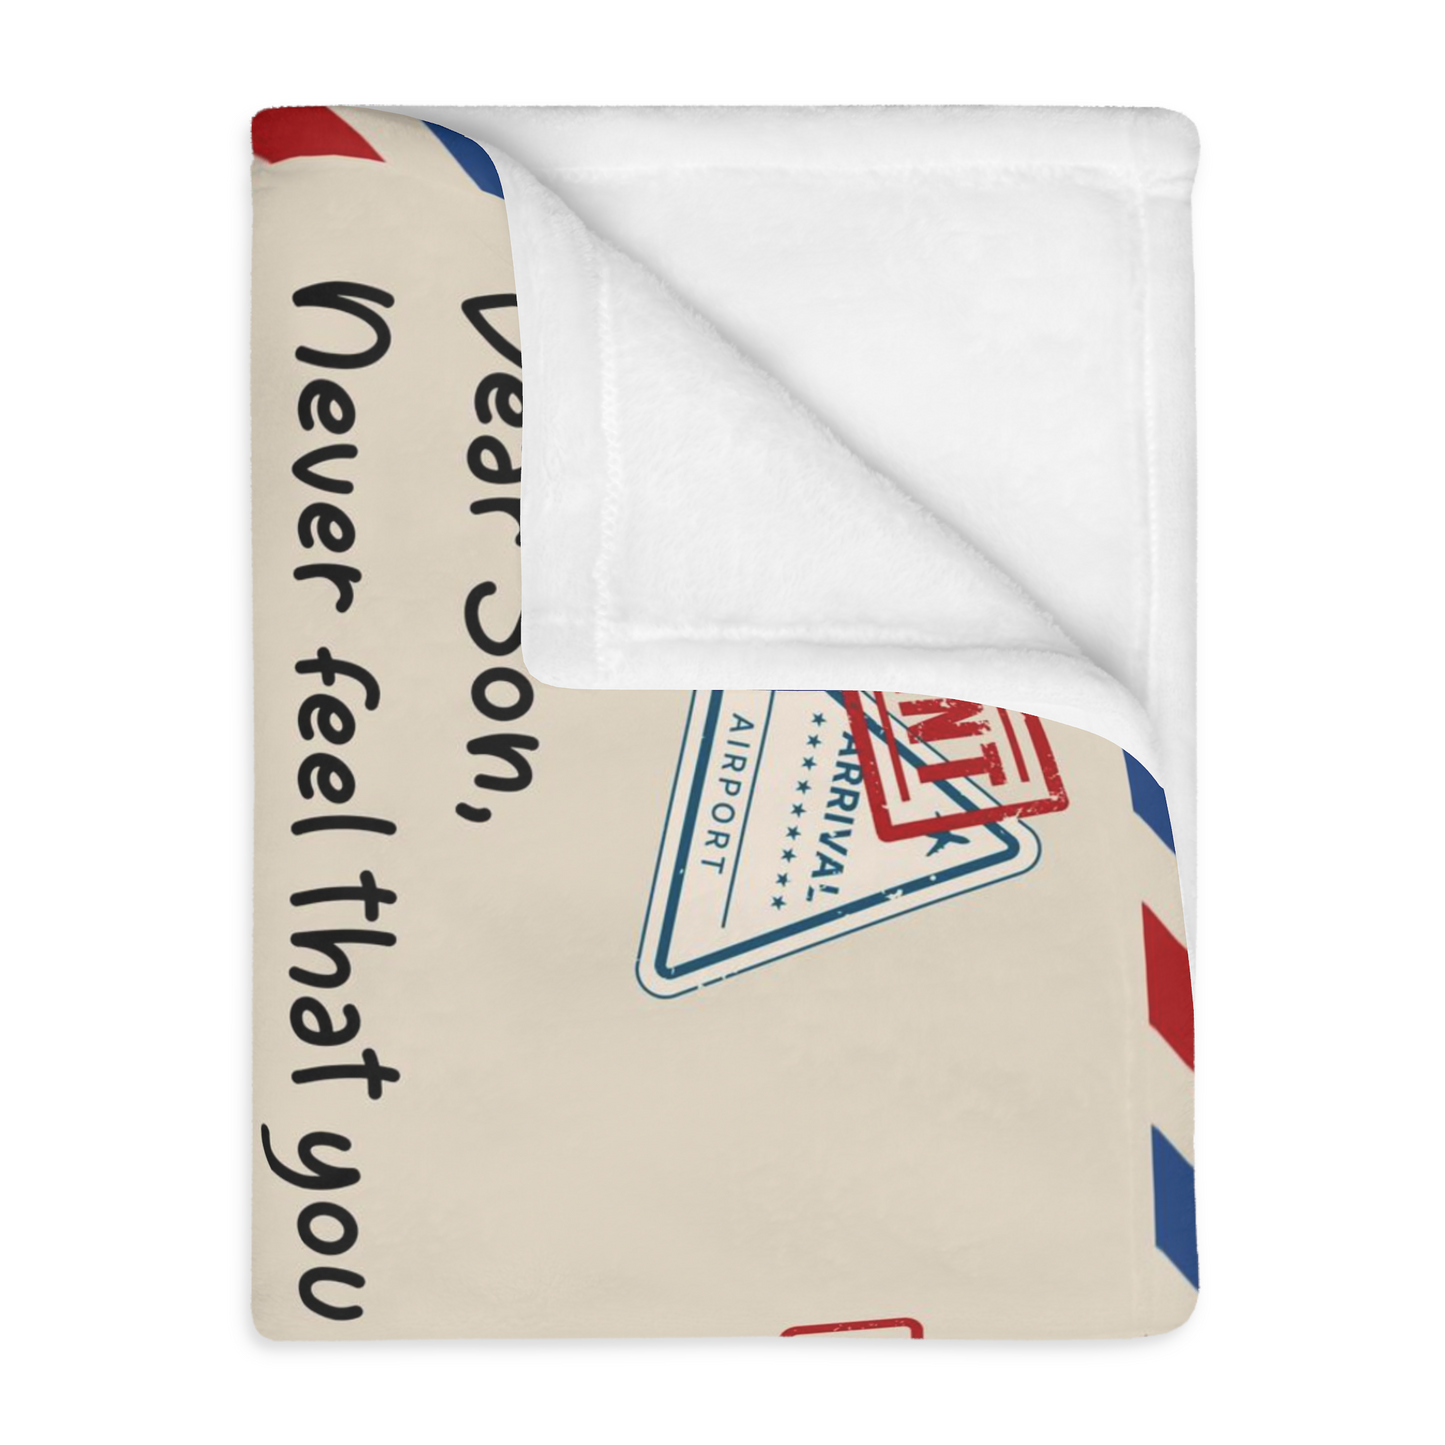 Dear Son From Mom  | Never Feel You Are Alone | Letter Blanket